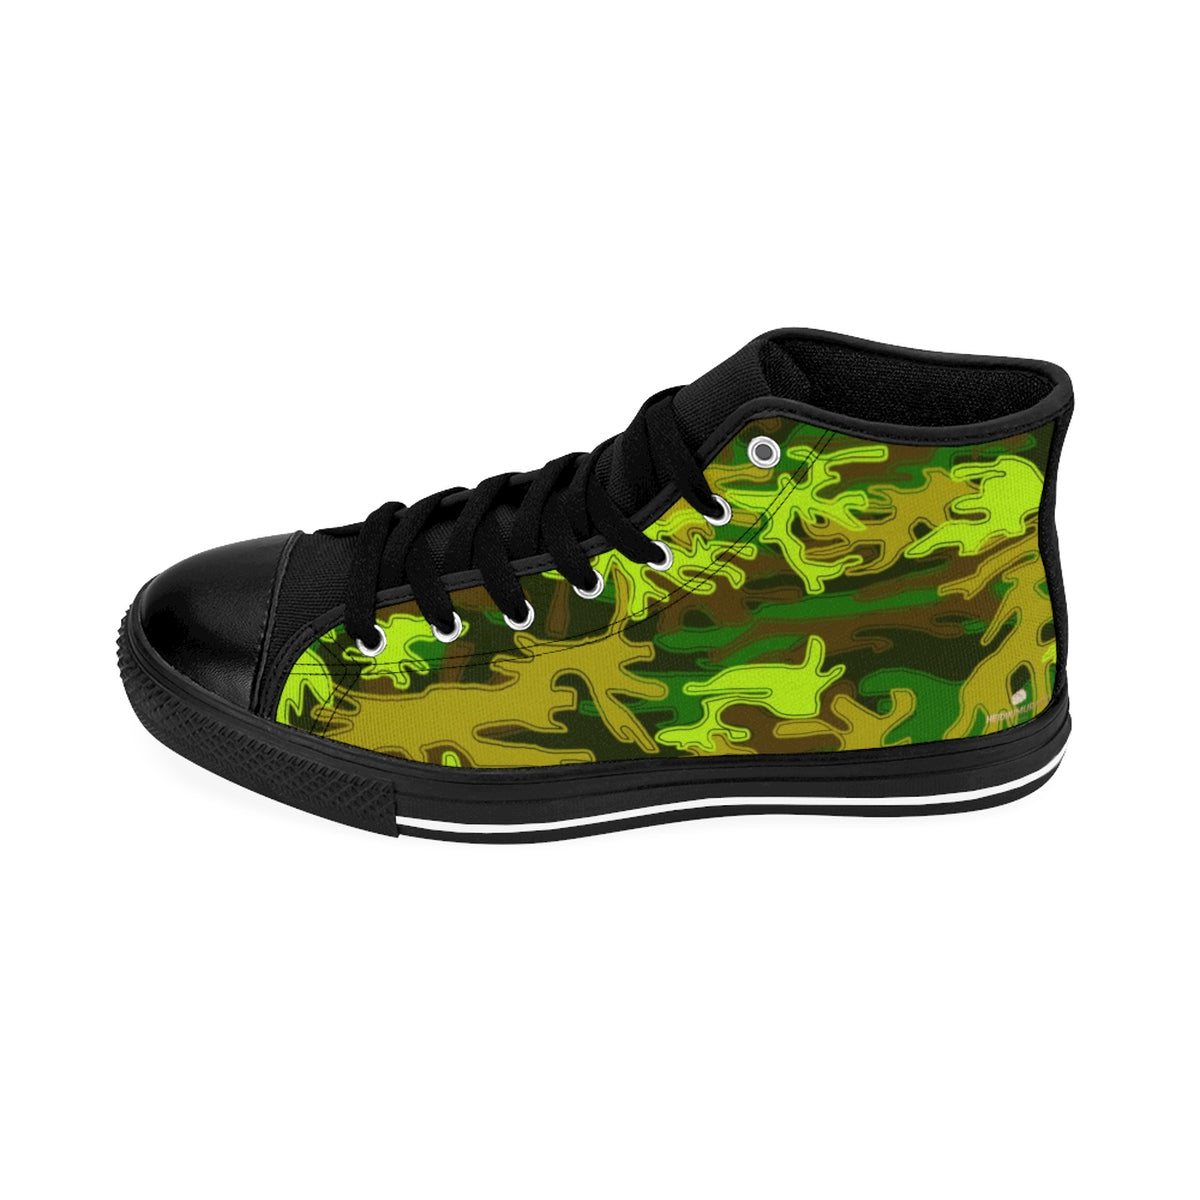 Bright Green Camouflage Army Military Print Men's High-top Sneakers (US Size: 6-14)-Men's High Top Sneakers-Black-US 9-Heidi Kimura Art LLC Green Camo Men's Sneakers, Bright Green Camouflage Army Military Print  Men's High-top Sneakers Tennis Shoes Fashionable Designer Men's High Top Sneakers, Men's Camo Sneaker Shoes (US Size: 6-14)